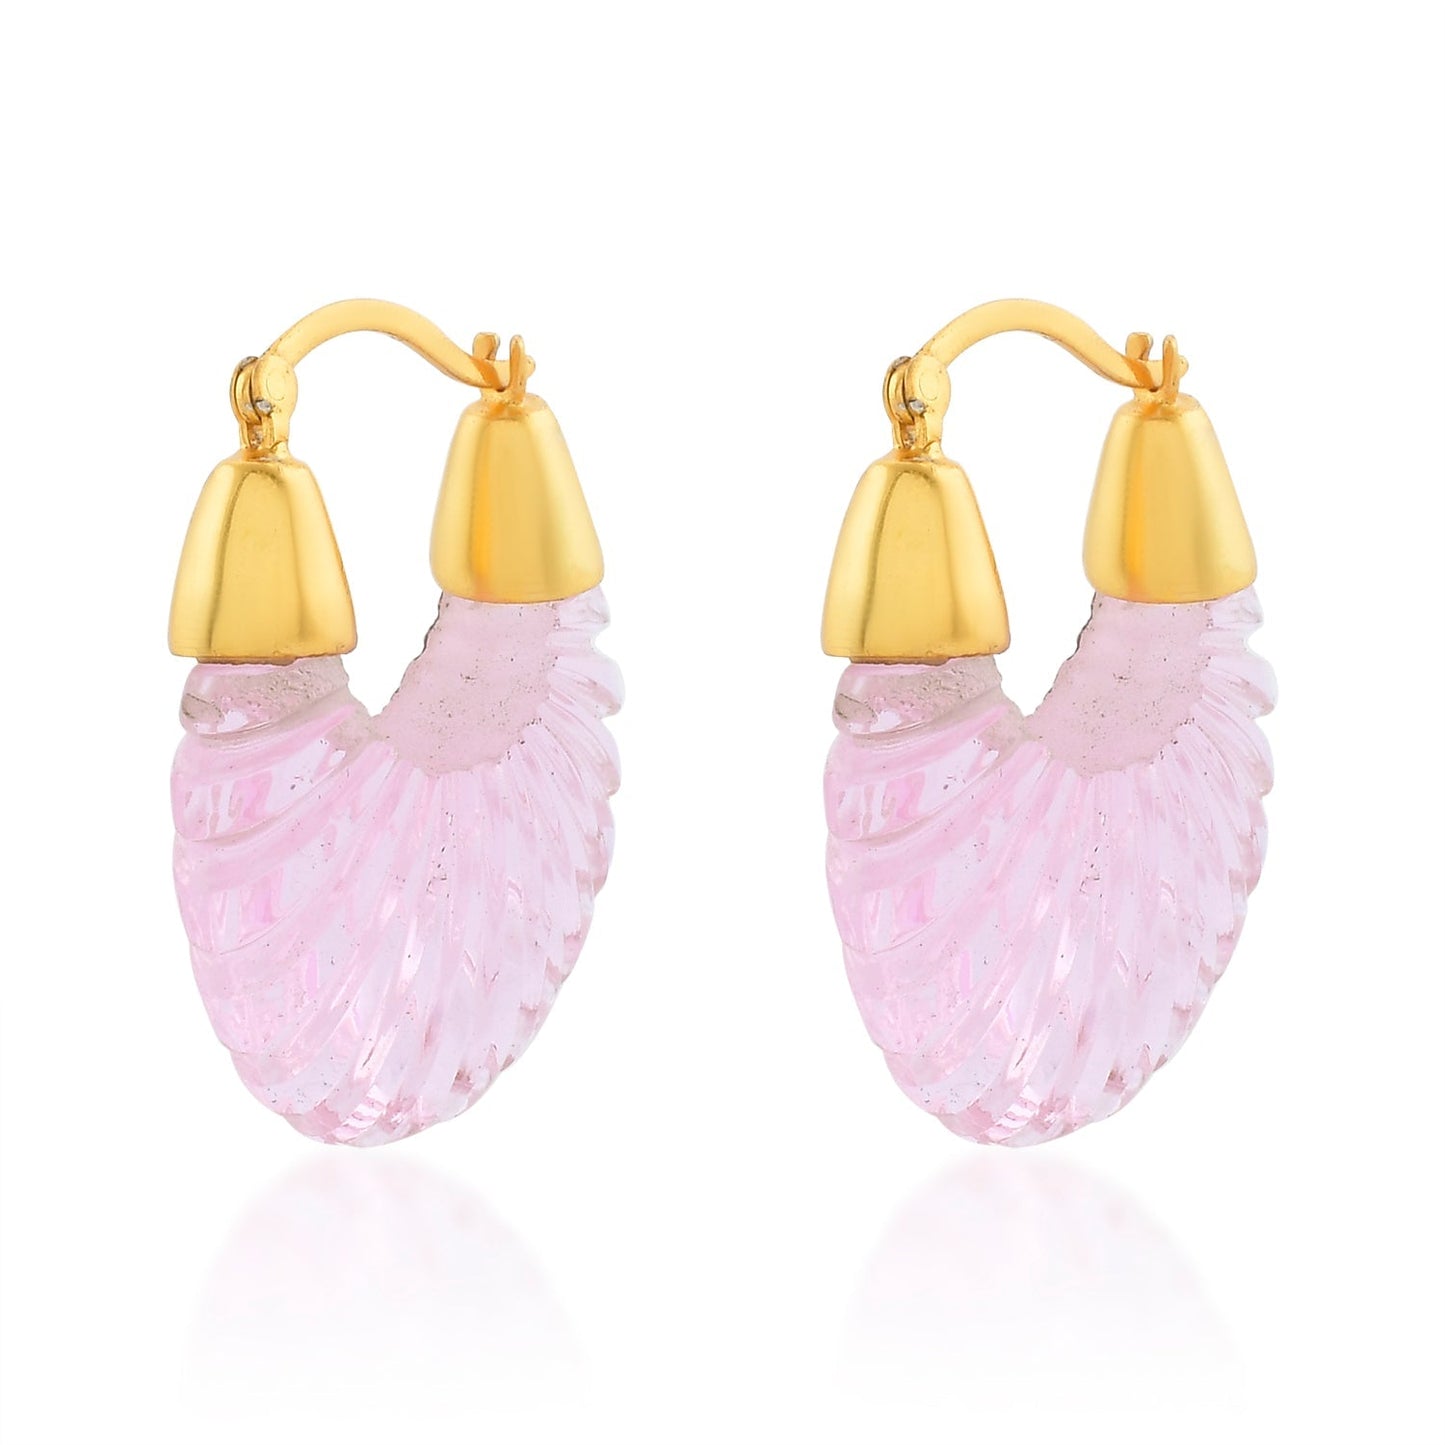 Shyla Etienne Earrings pink - Collected